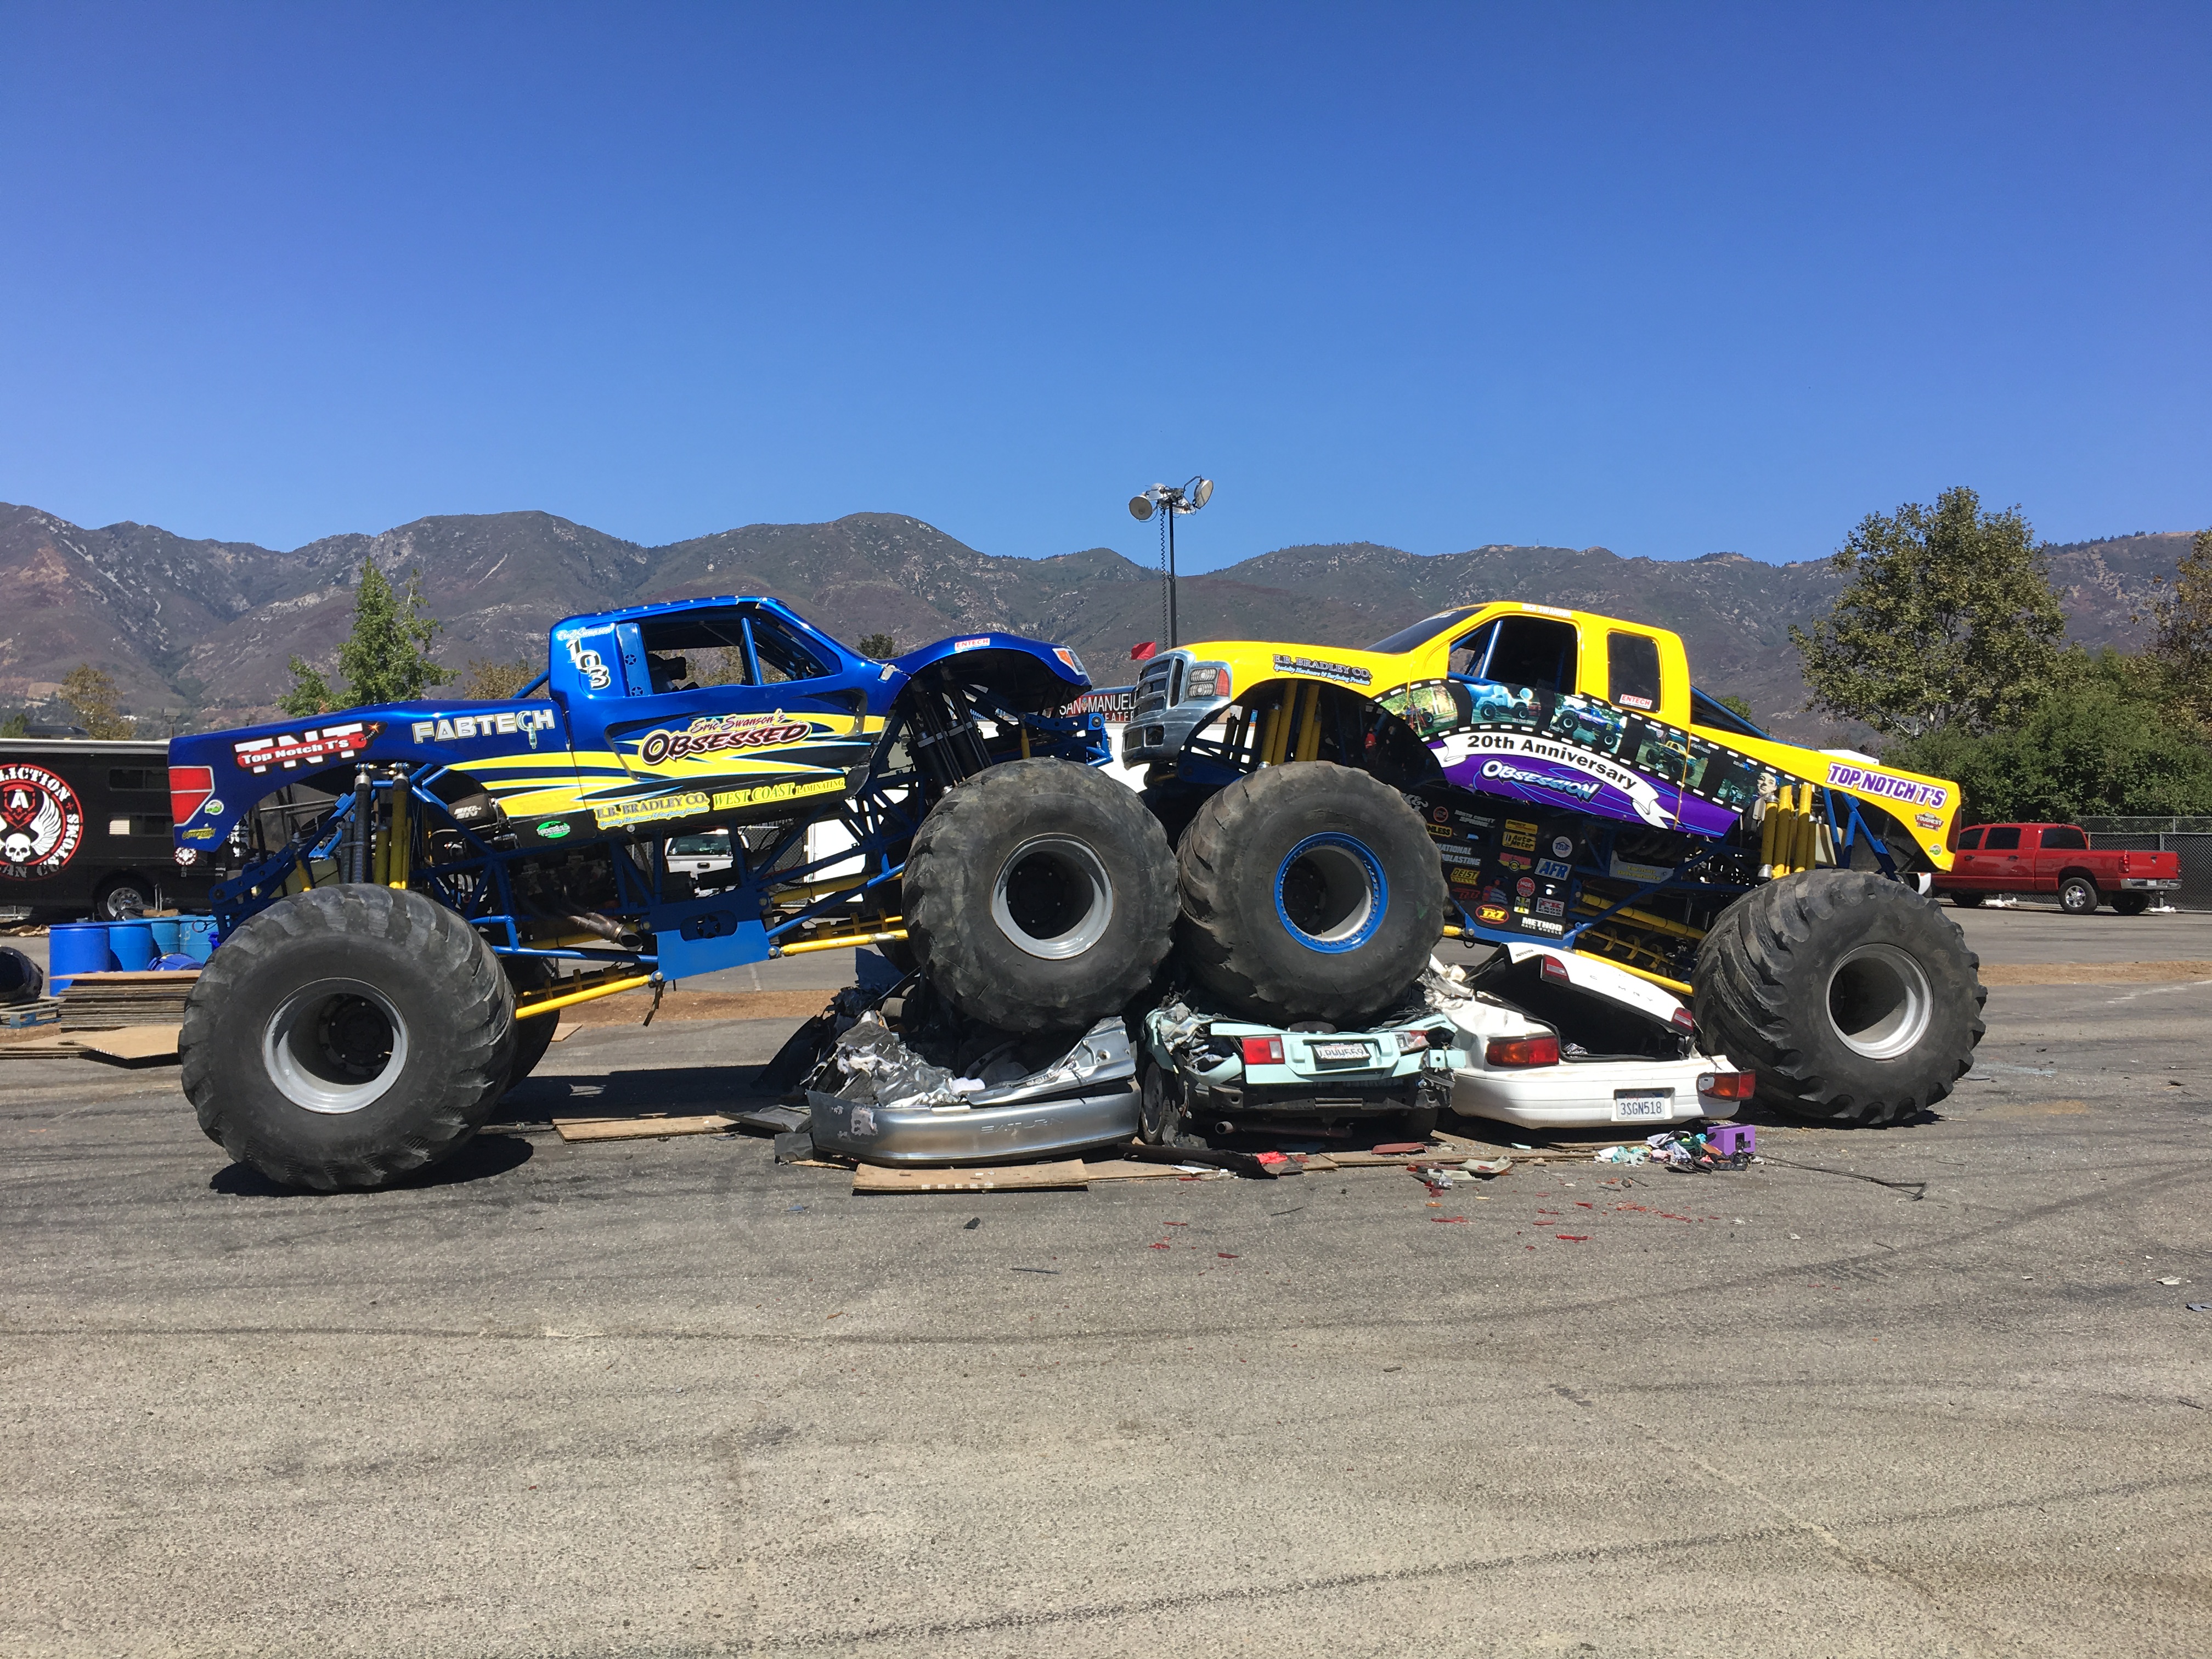 Monster Truck Nitro tour comes to Tulare